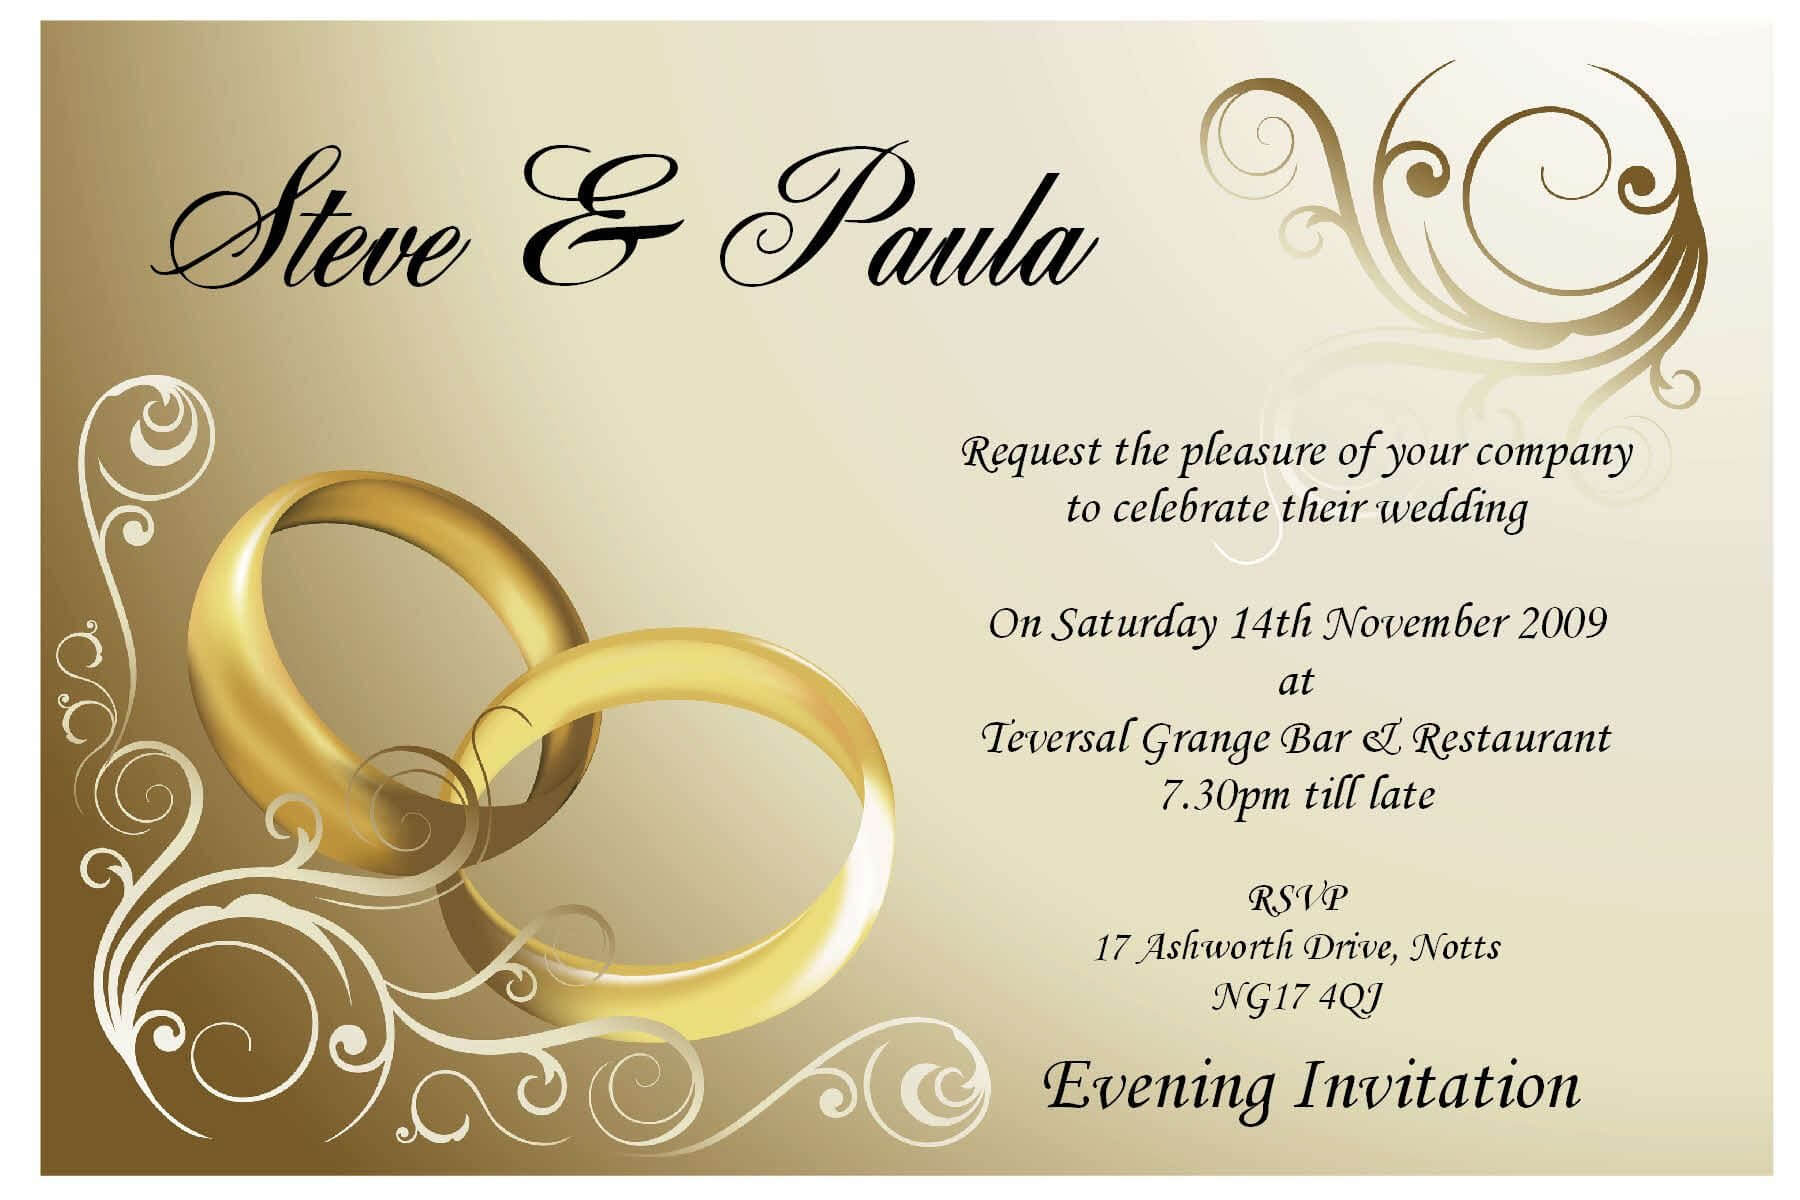 Wedding Invitation Card Template | Theveliger Pertaining To Sample Wedding Invitation Cards Templates